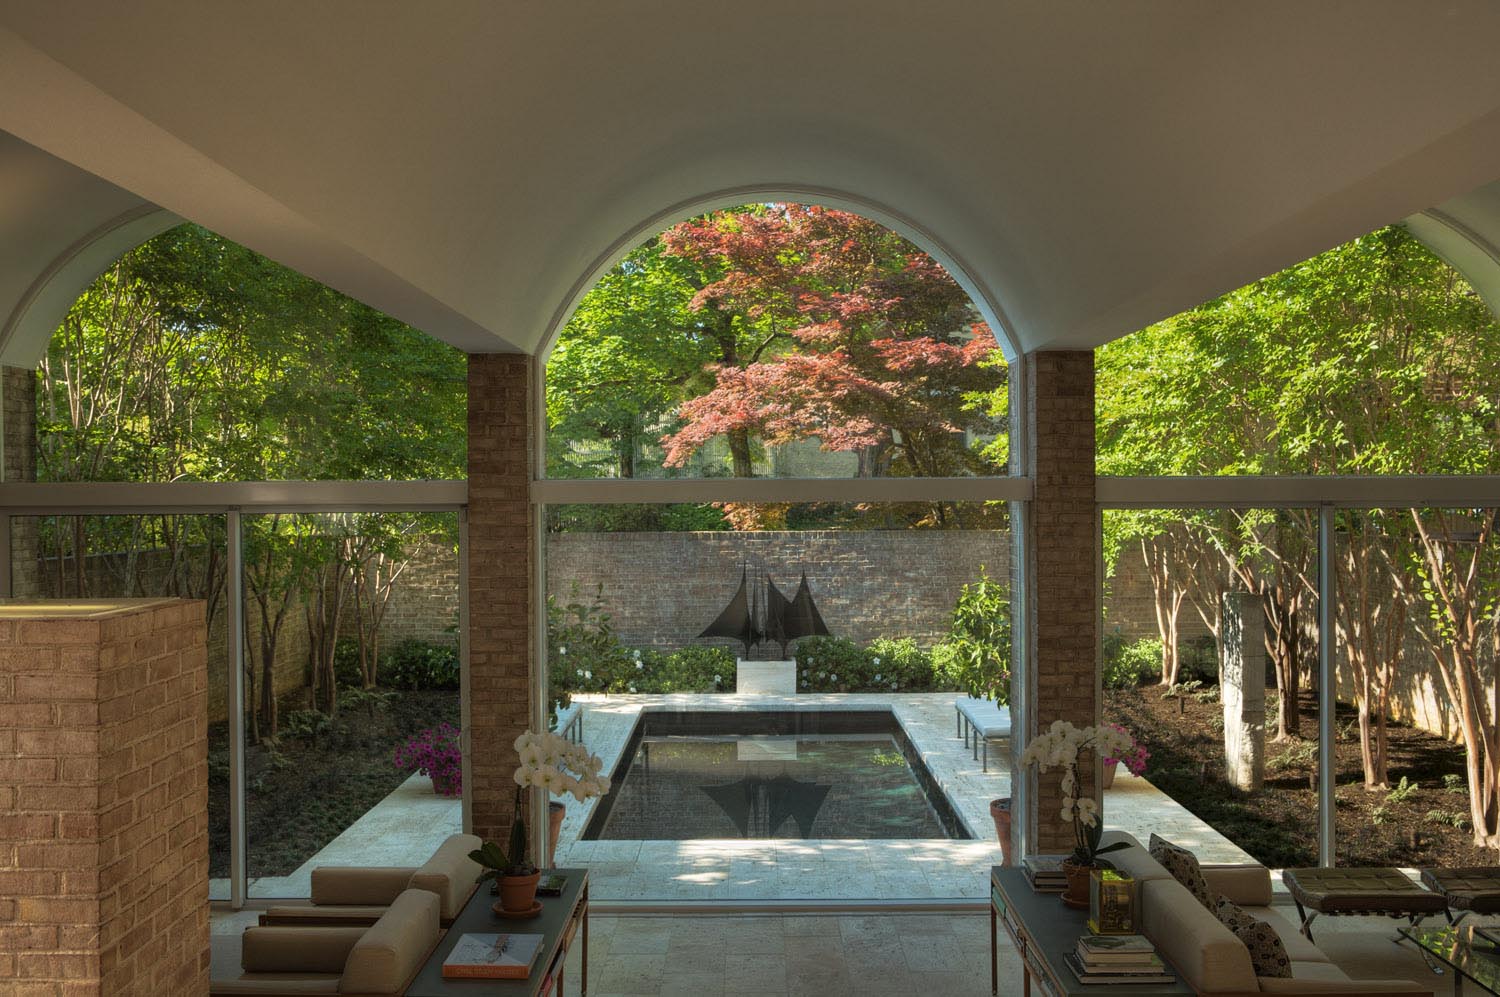   Project Location:  Washington, DC  Completion:  2008  General Contractor:  Evergro Landscaping  Primary Material Palette:  Travertine, Crape Myrtle, Azalea  Photos By:  Victoria Cooper 